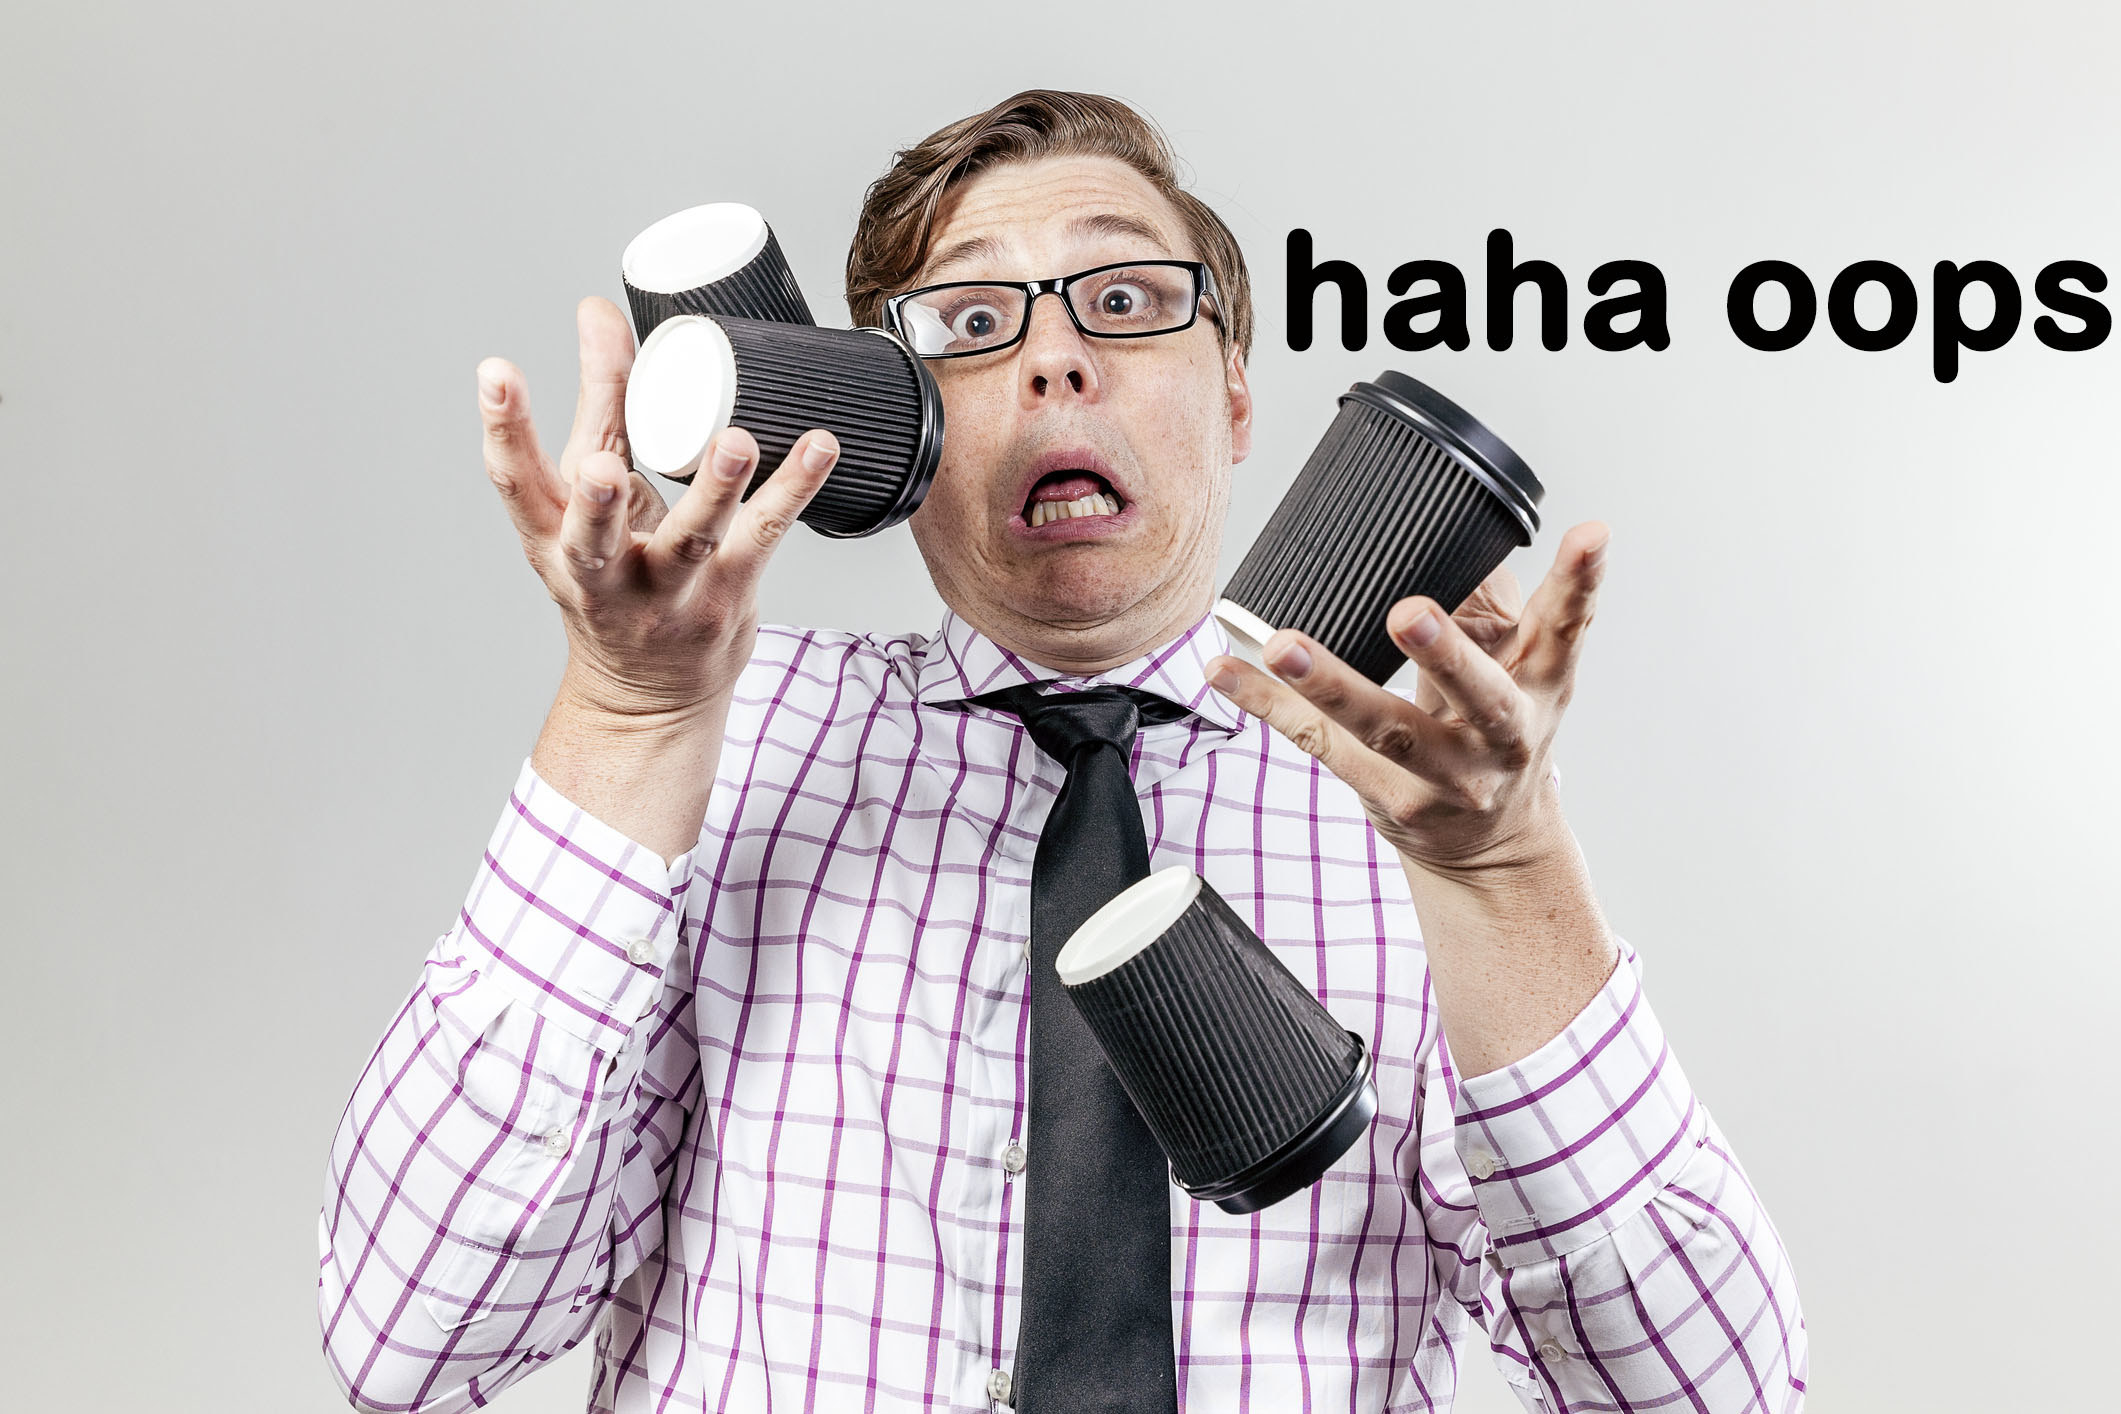 stock photo of a man dropping a bunch of cups of coffee and going, &quot;haha oops&quot;